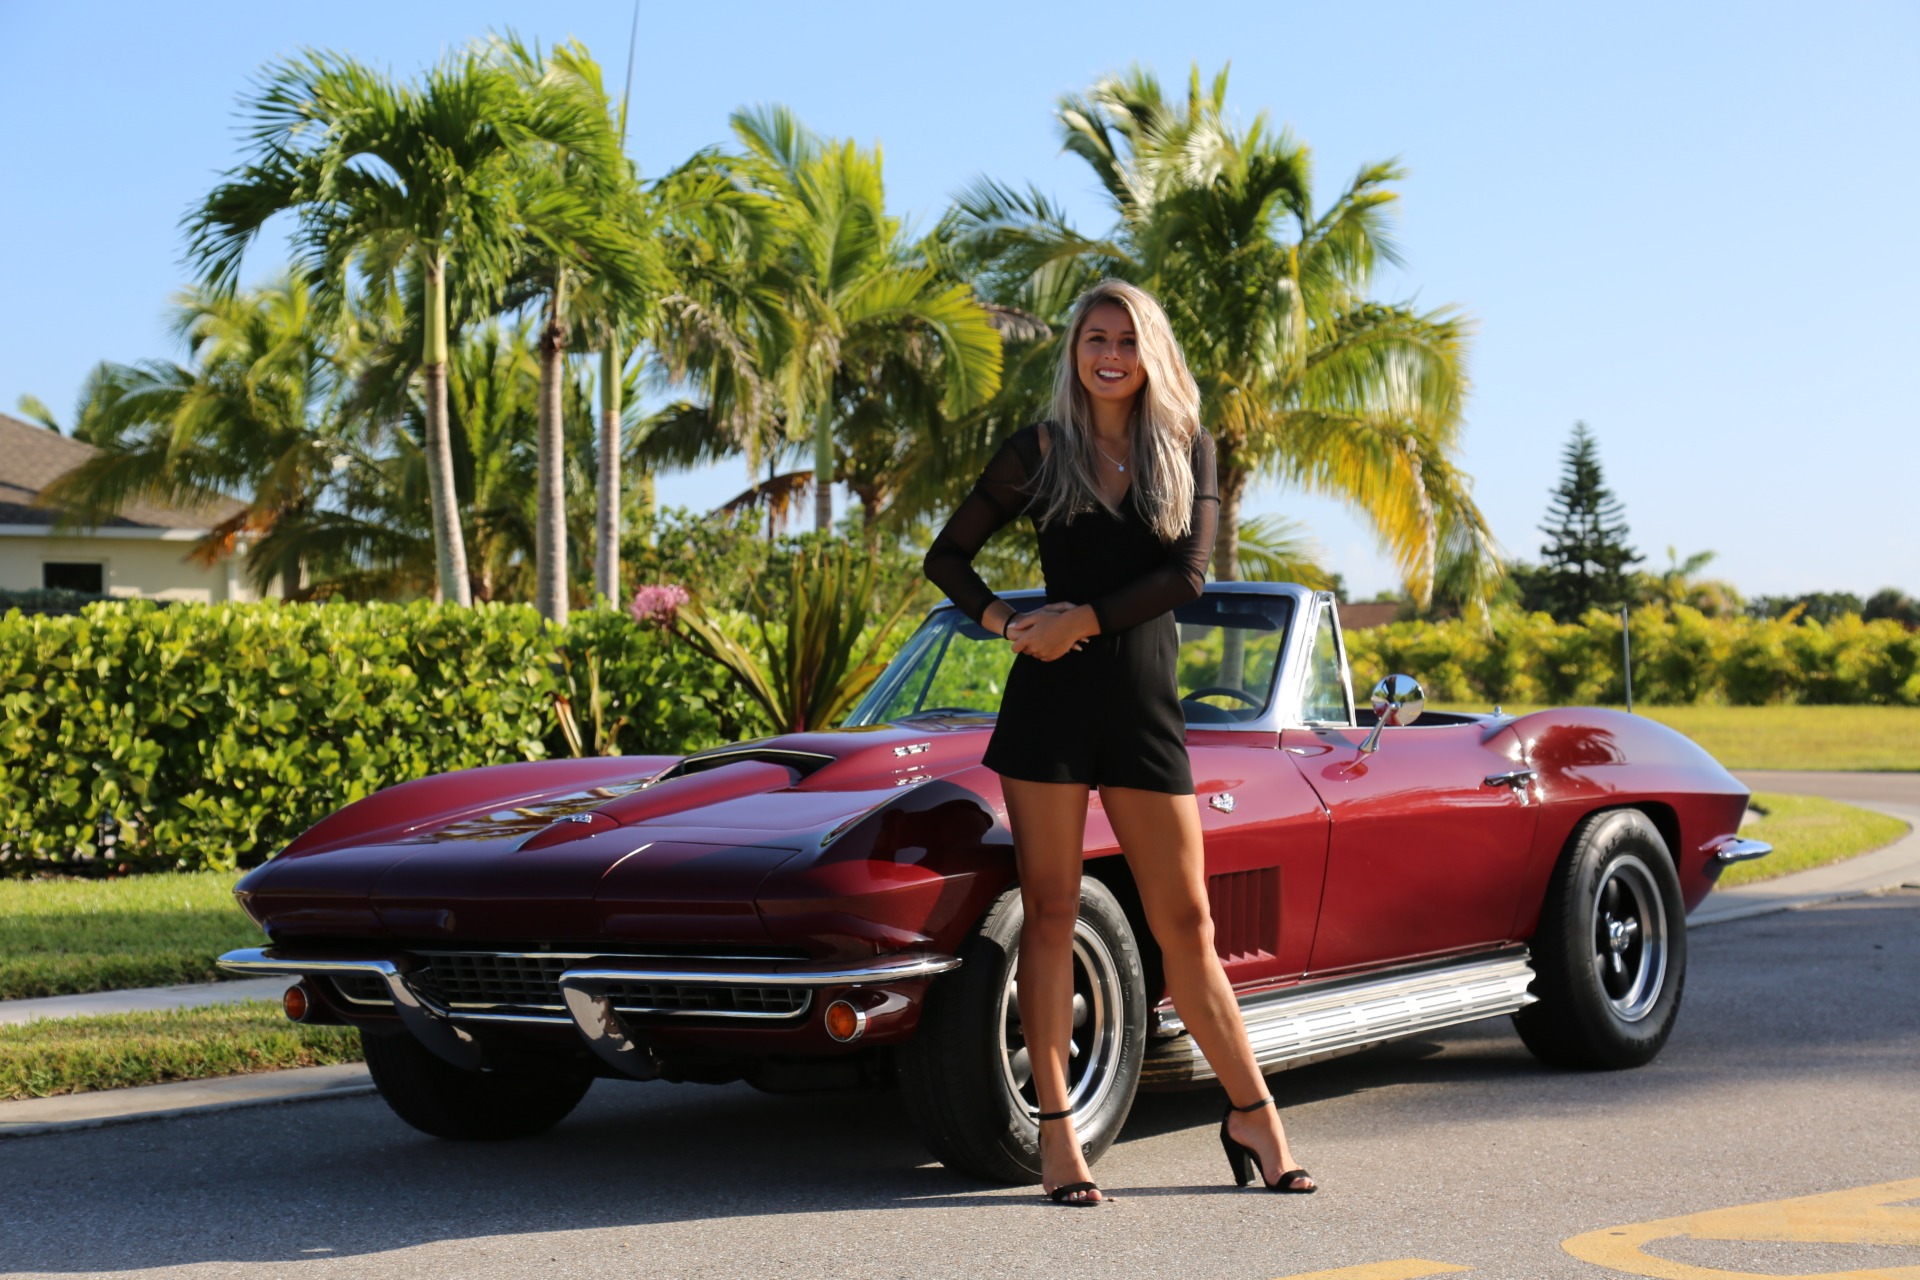 Used 1964 Chevrolet Corvette Stingray for sale Sold at Muscle Cars for Sale Inc. in Fort Myers FL 33912 1